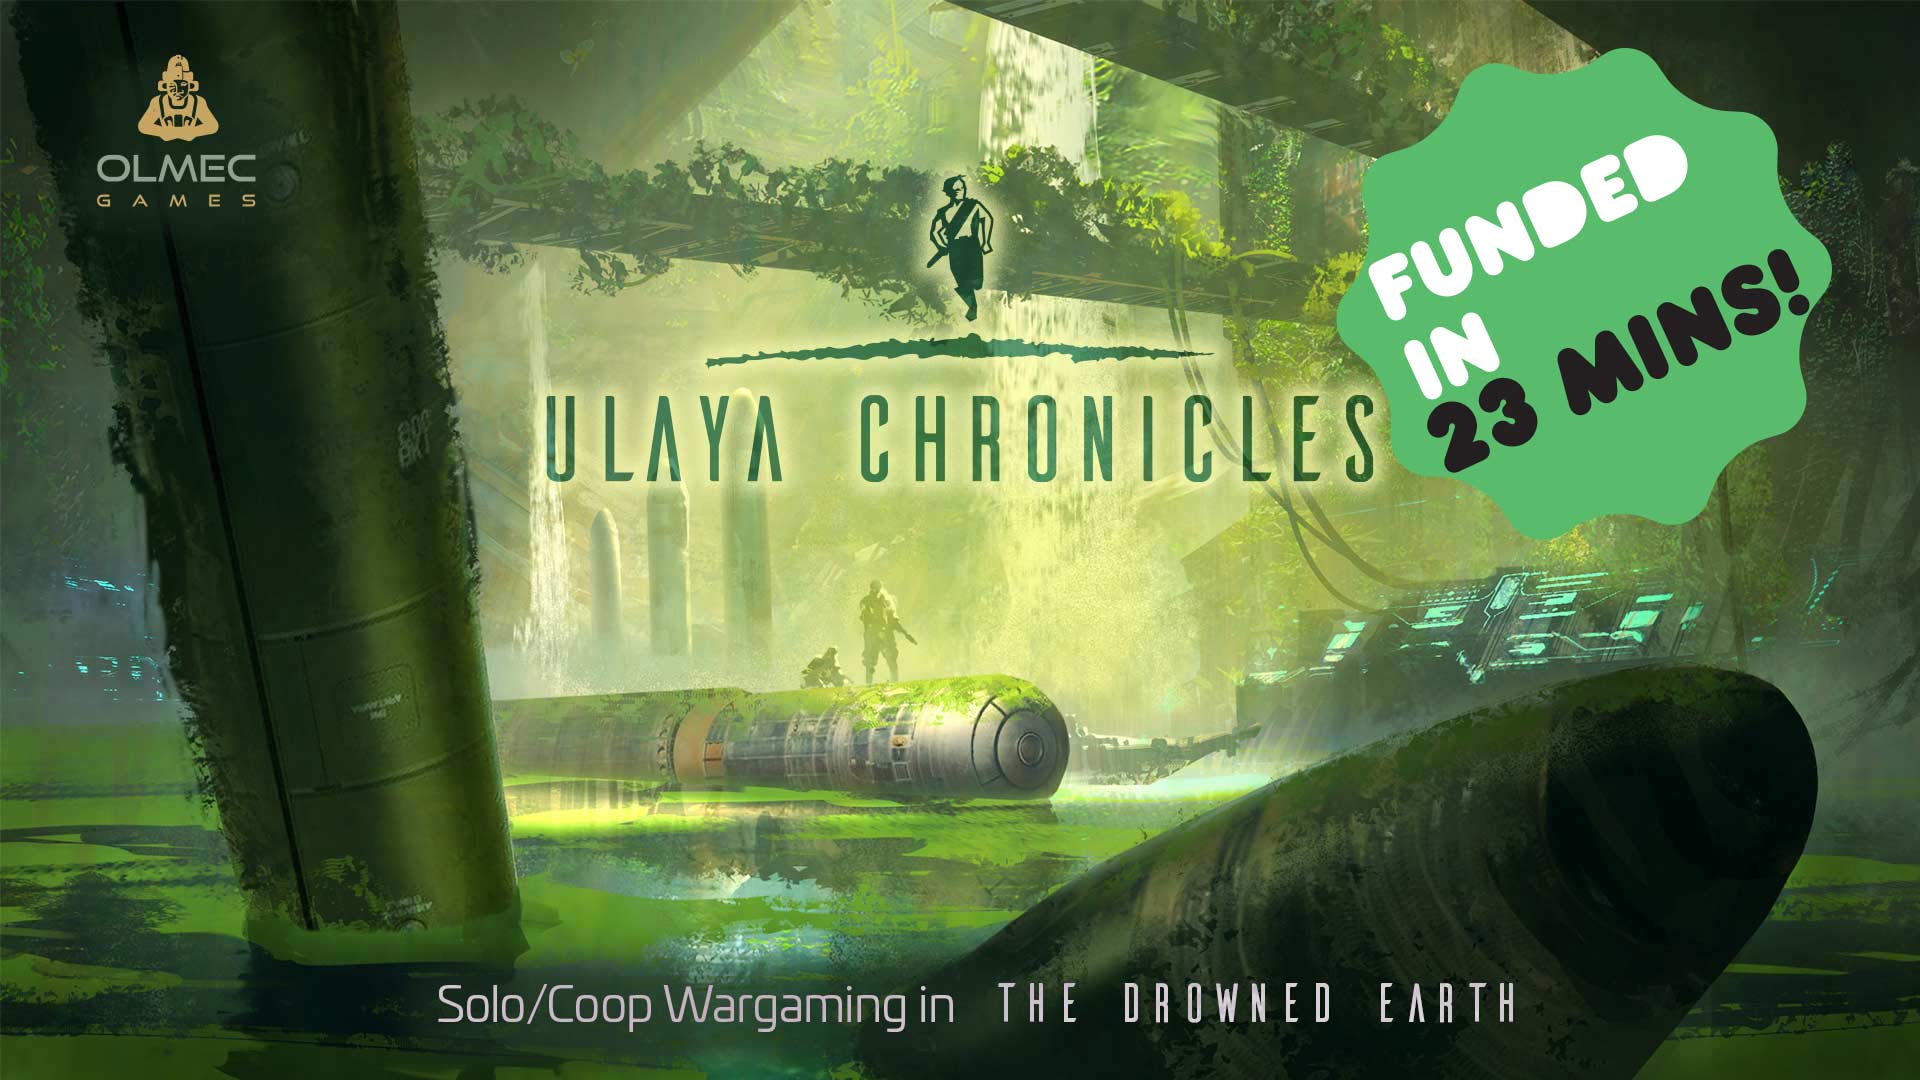 Ulaya Chronicles: Funded in 23 minutes!